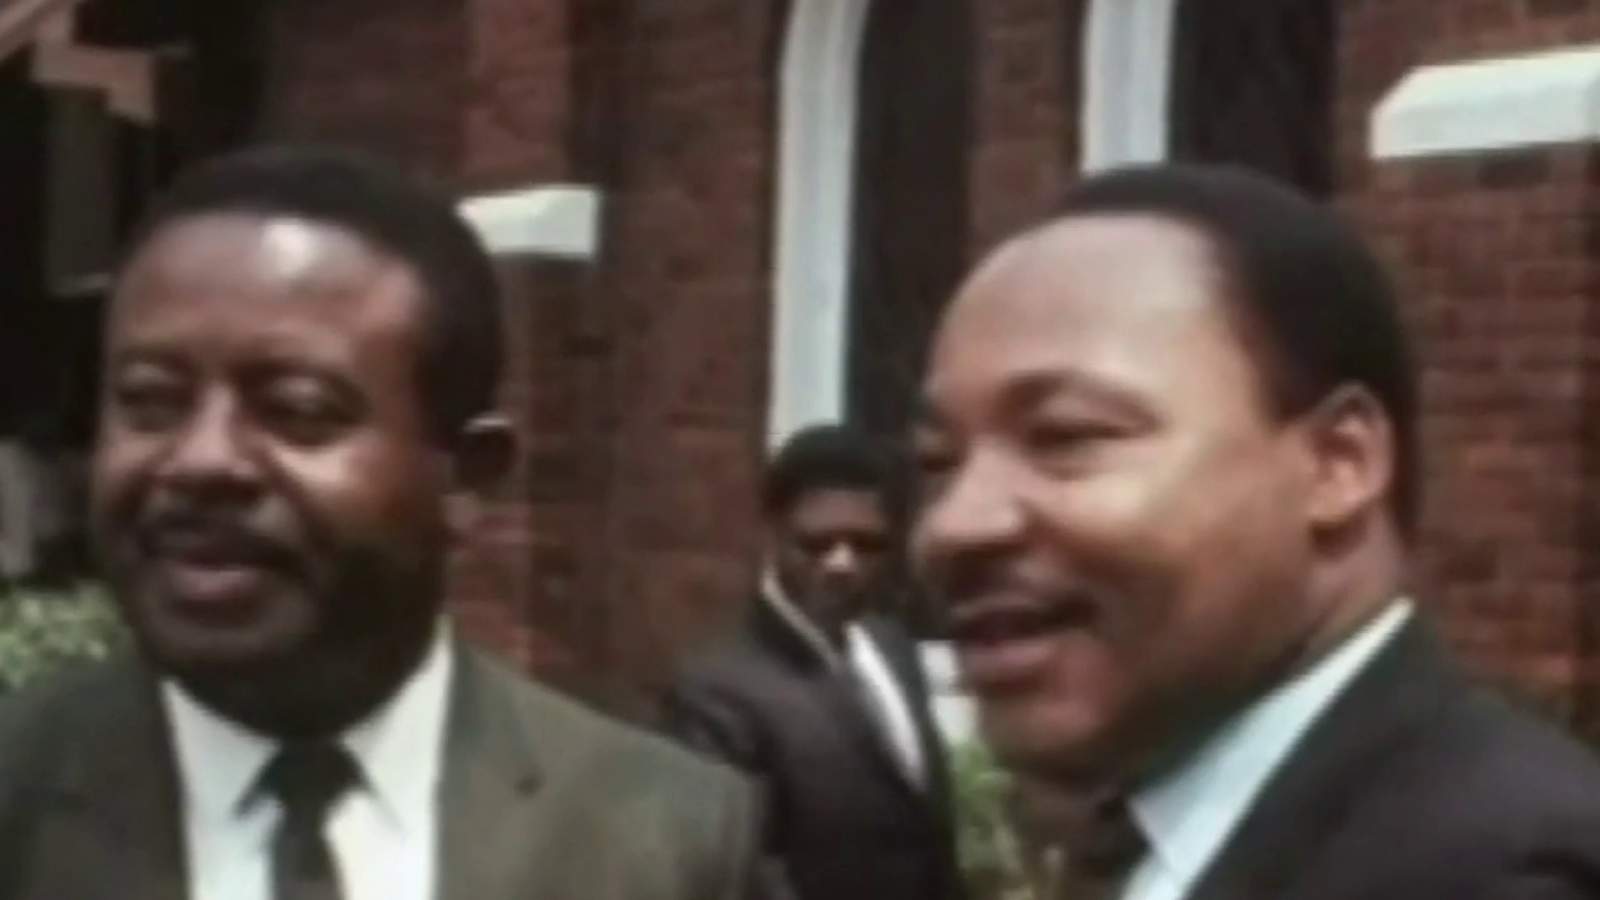 Lessons from the trip Martin Luther King Jr. took to Michigan State University in 1965